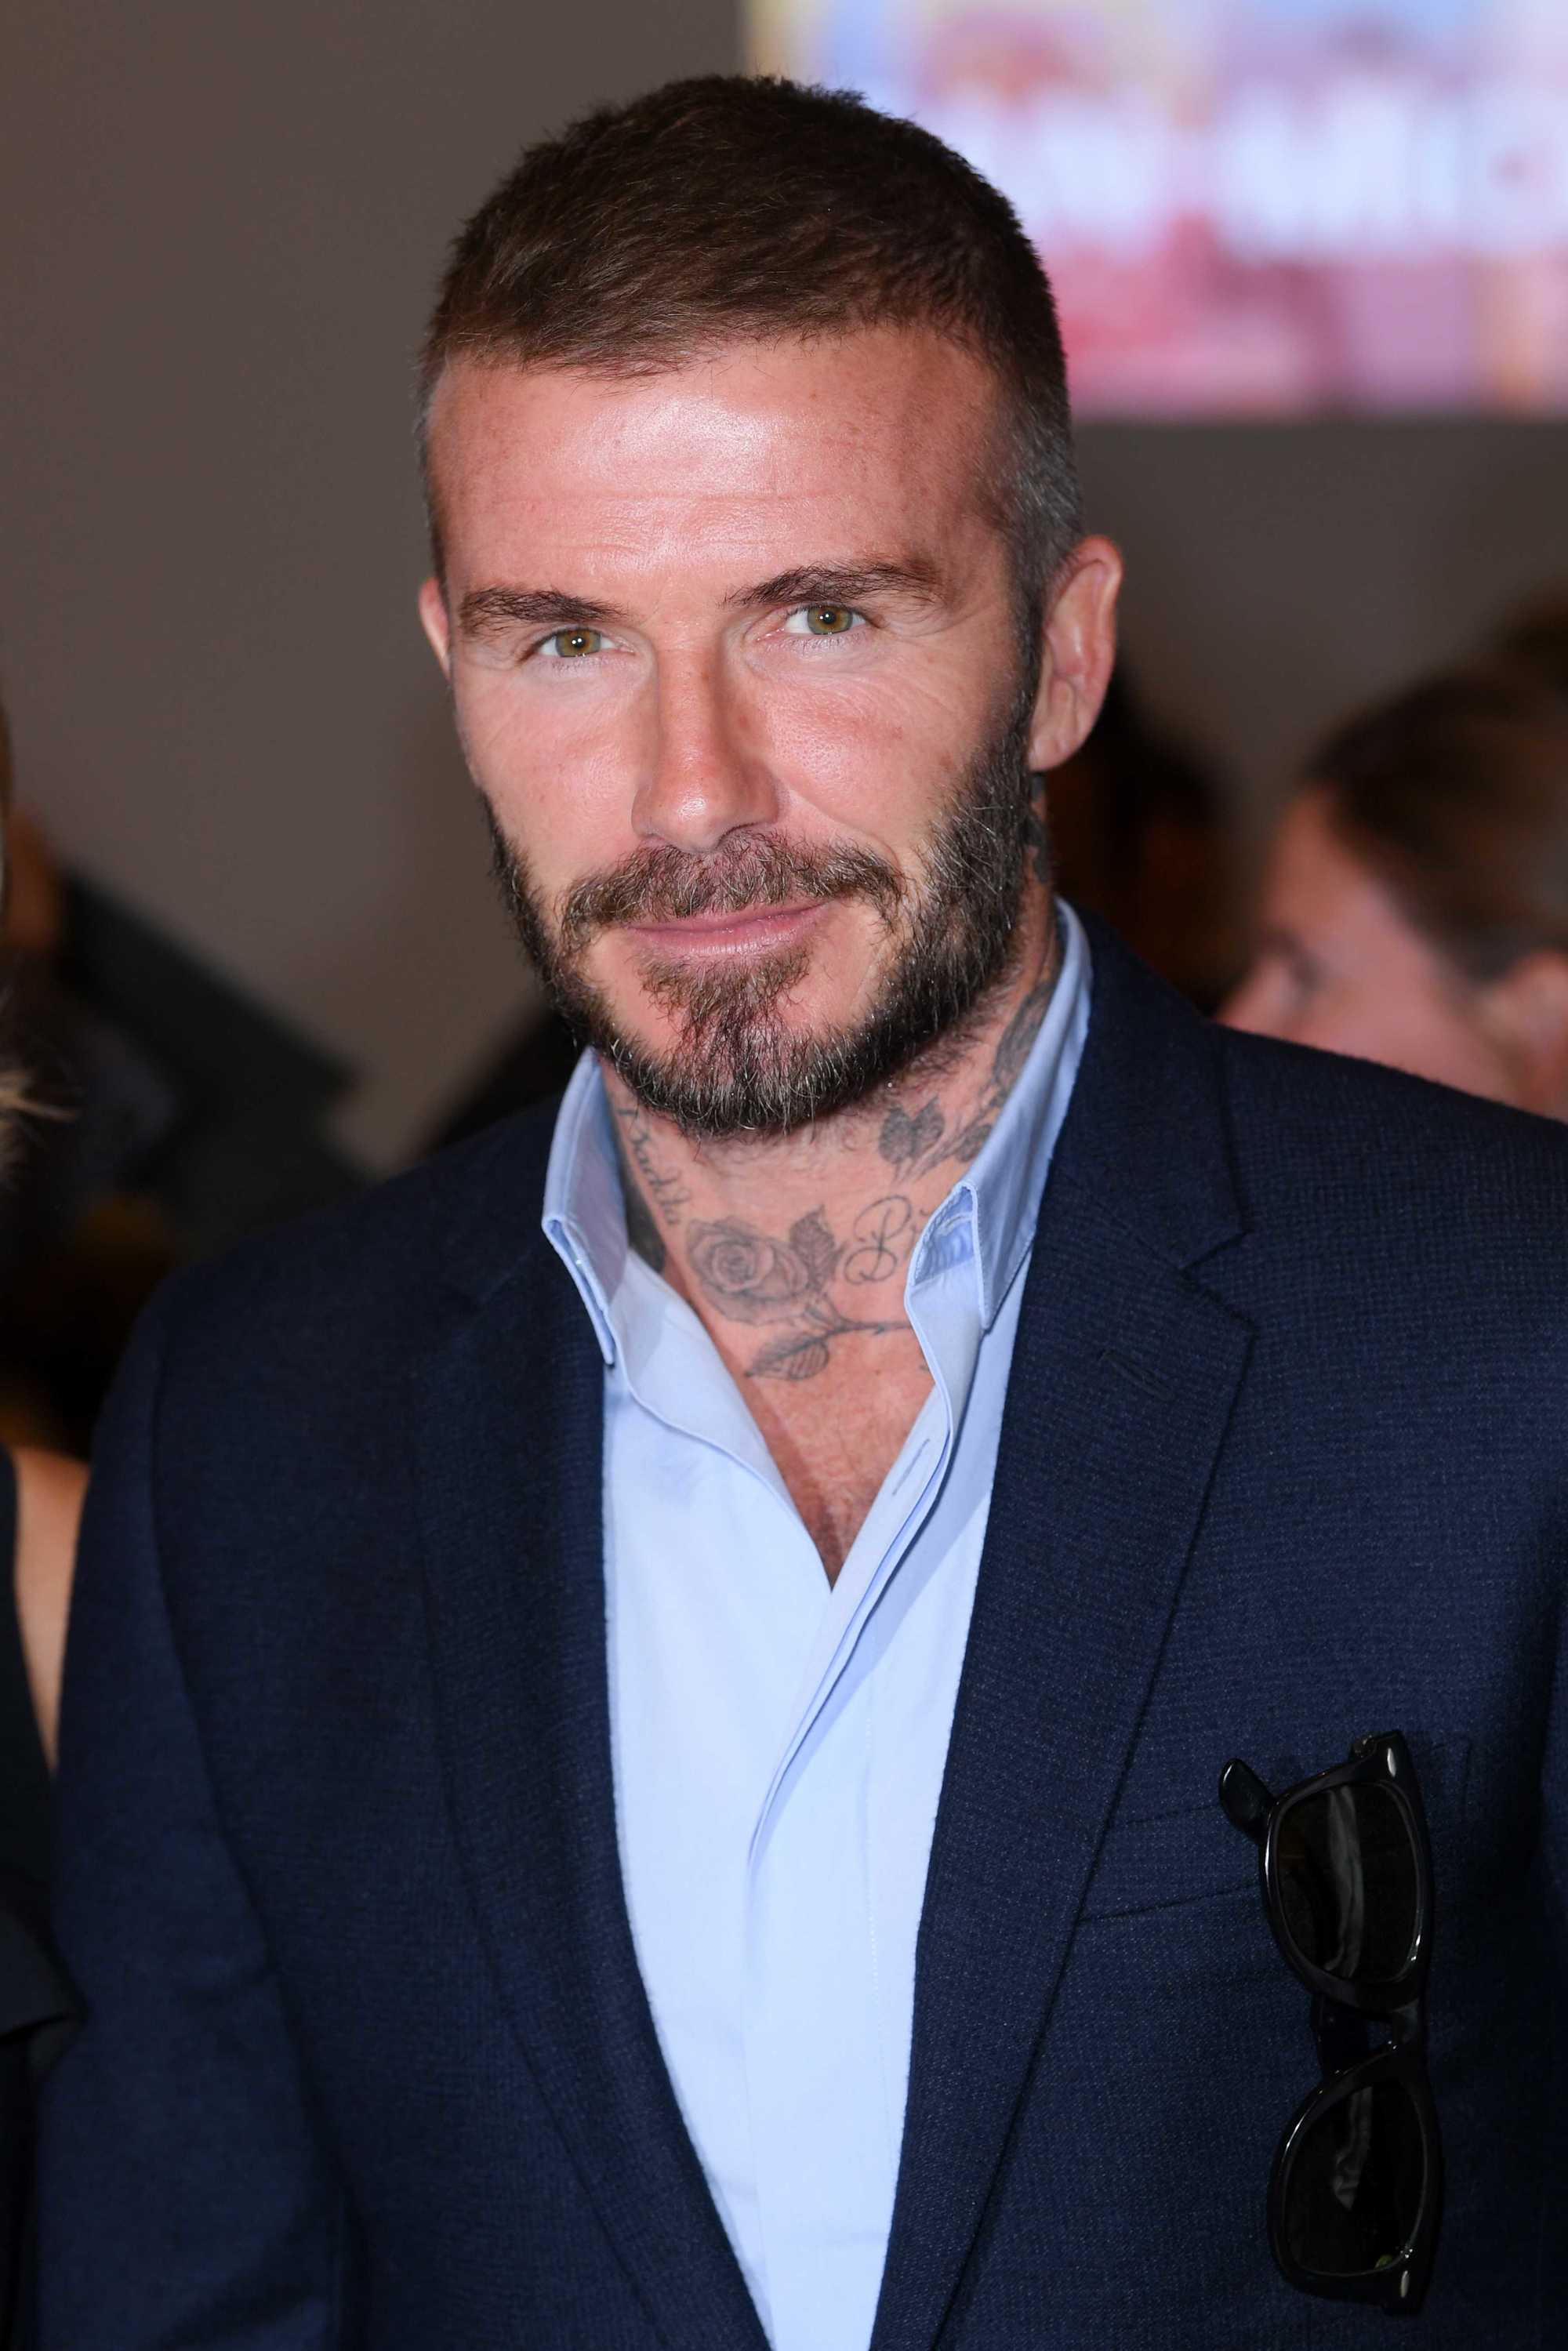 Hairstyles for men over 40: David Beckham with a buzz cut and facial hair, earing a blue shirt and navy suit